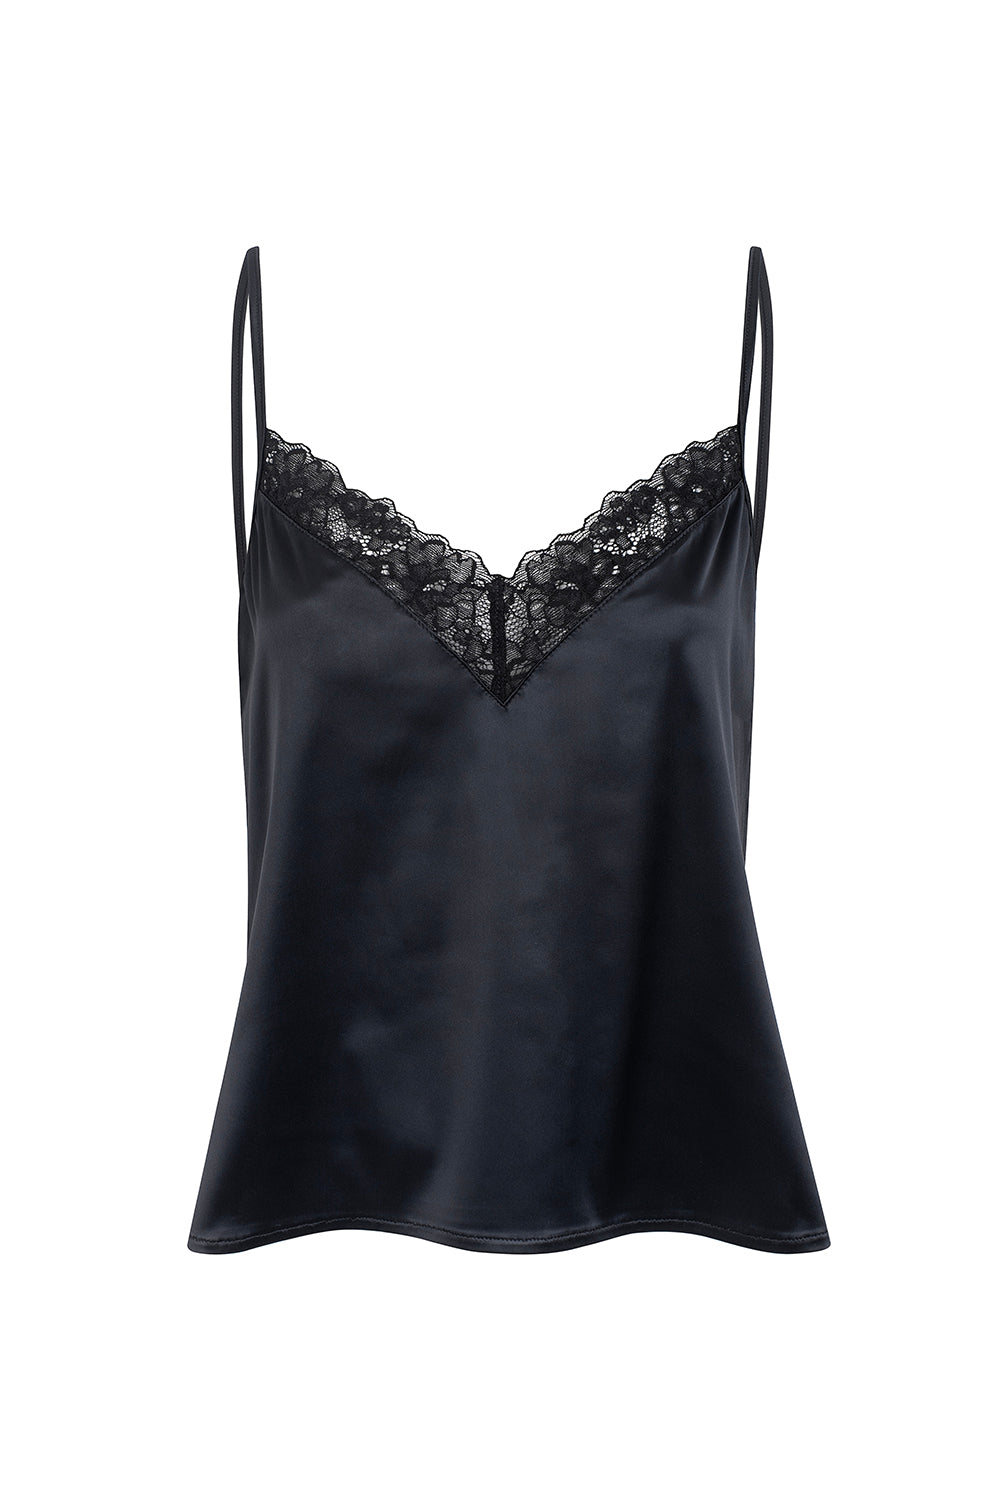 BLACK SATIN &amp; LACE TOP (OUT OF STOCK)